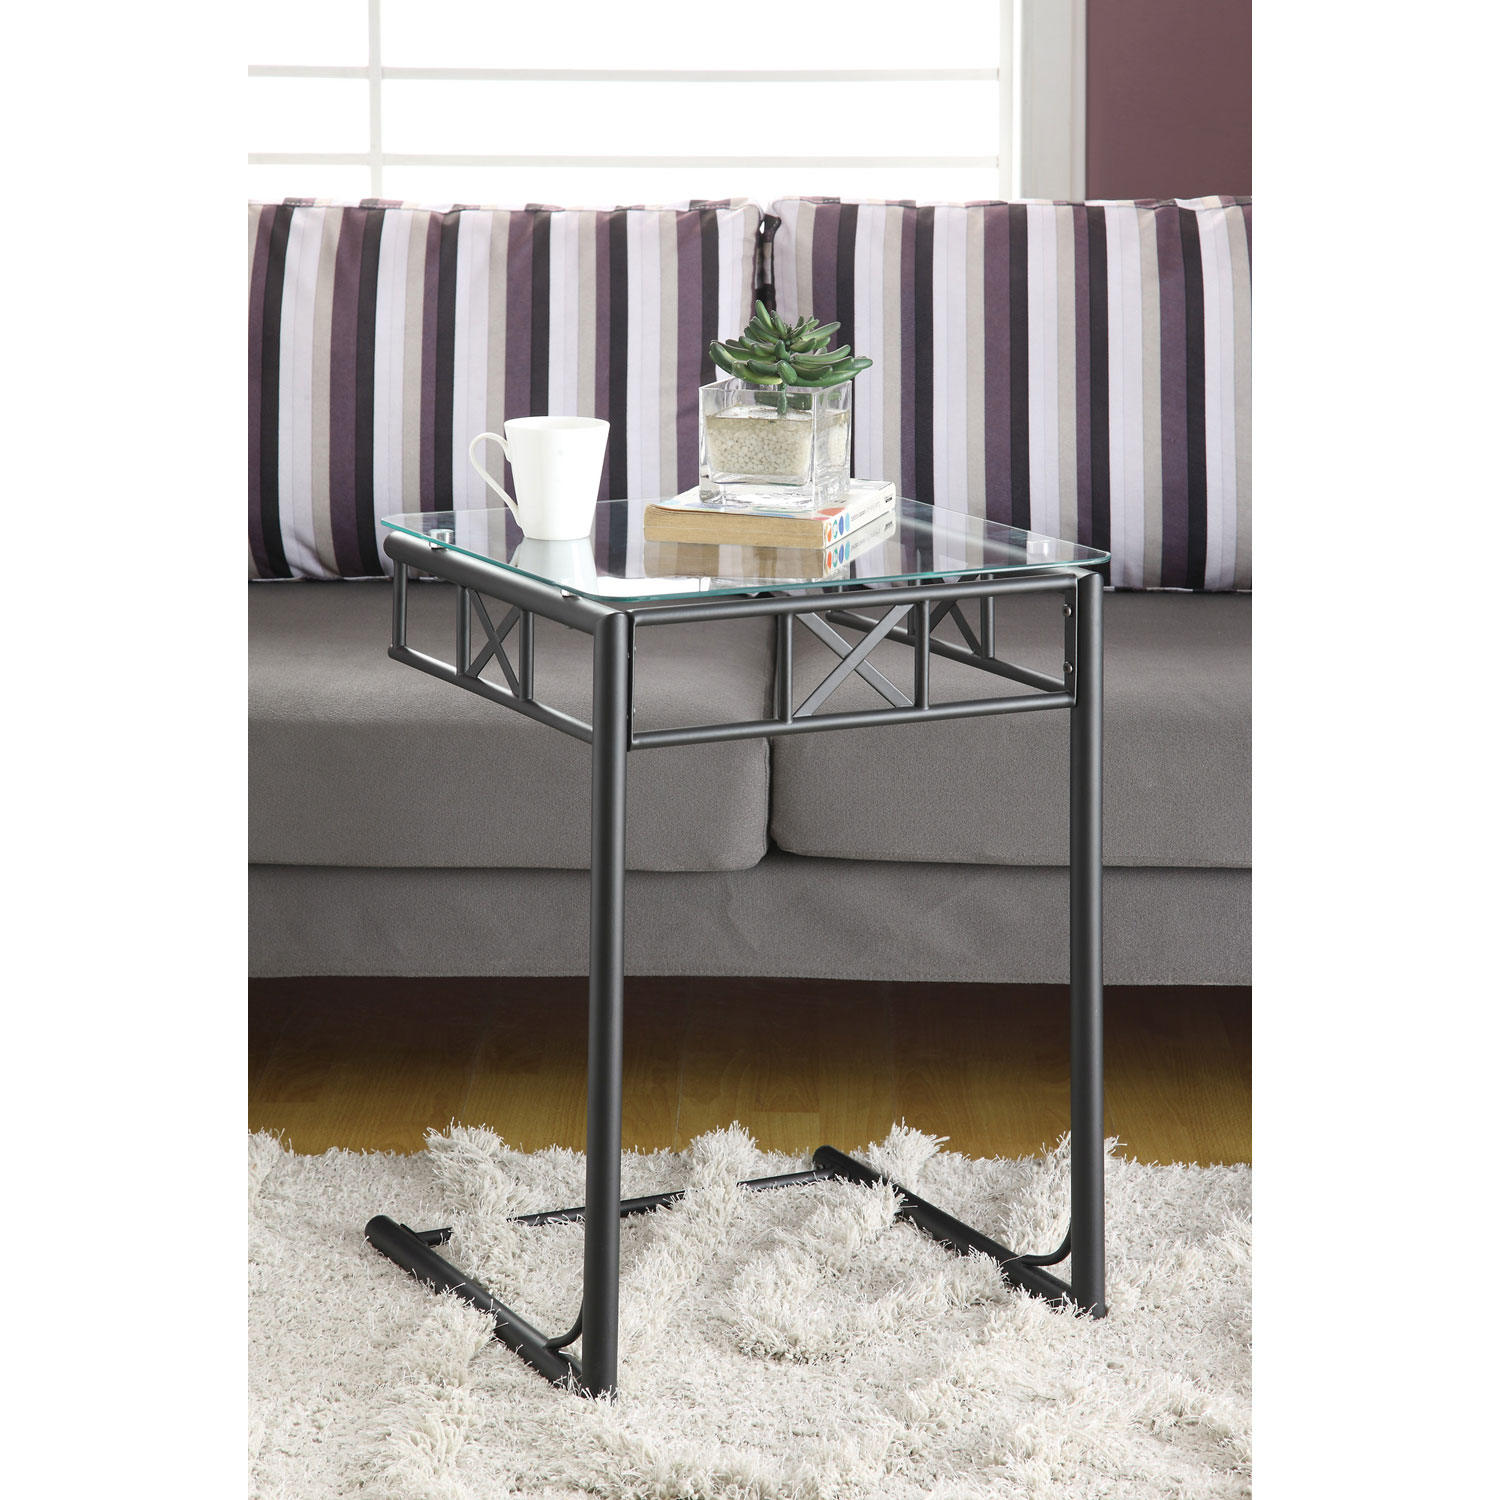 hawthorne ave accent table black metal with tempered glass top bronze hover zoom coffee sets small for bedroom uttermost lamps nautical kitchen teal blue decorative chest